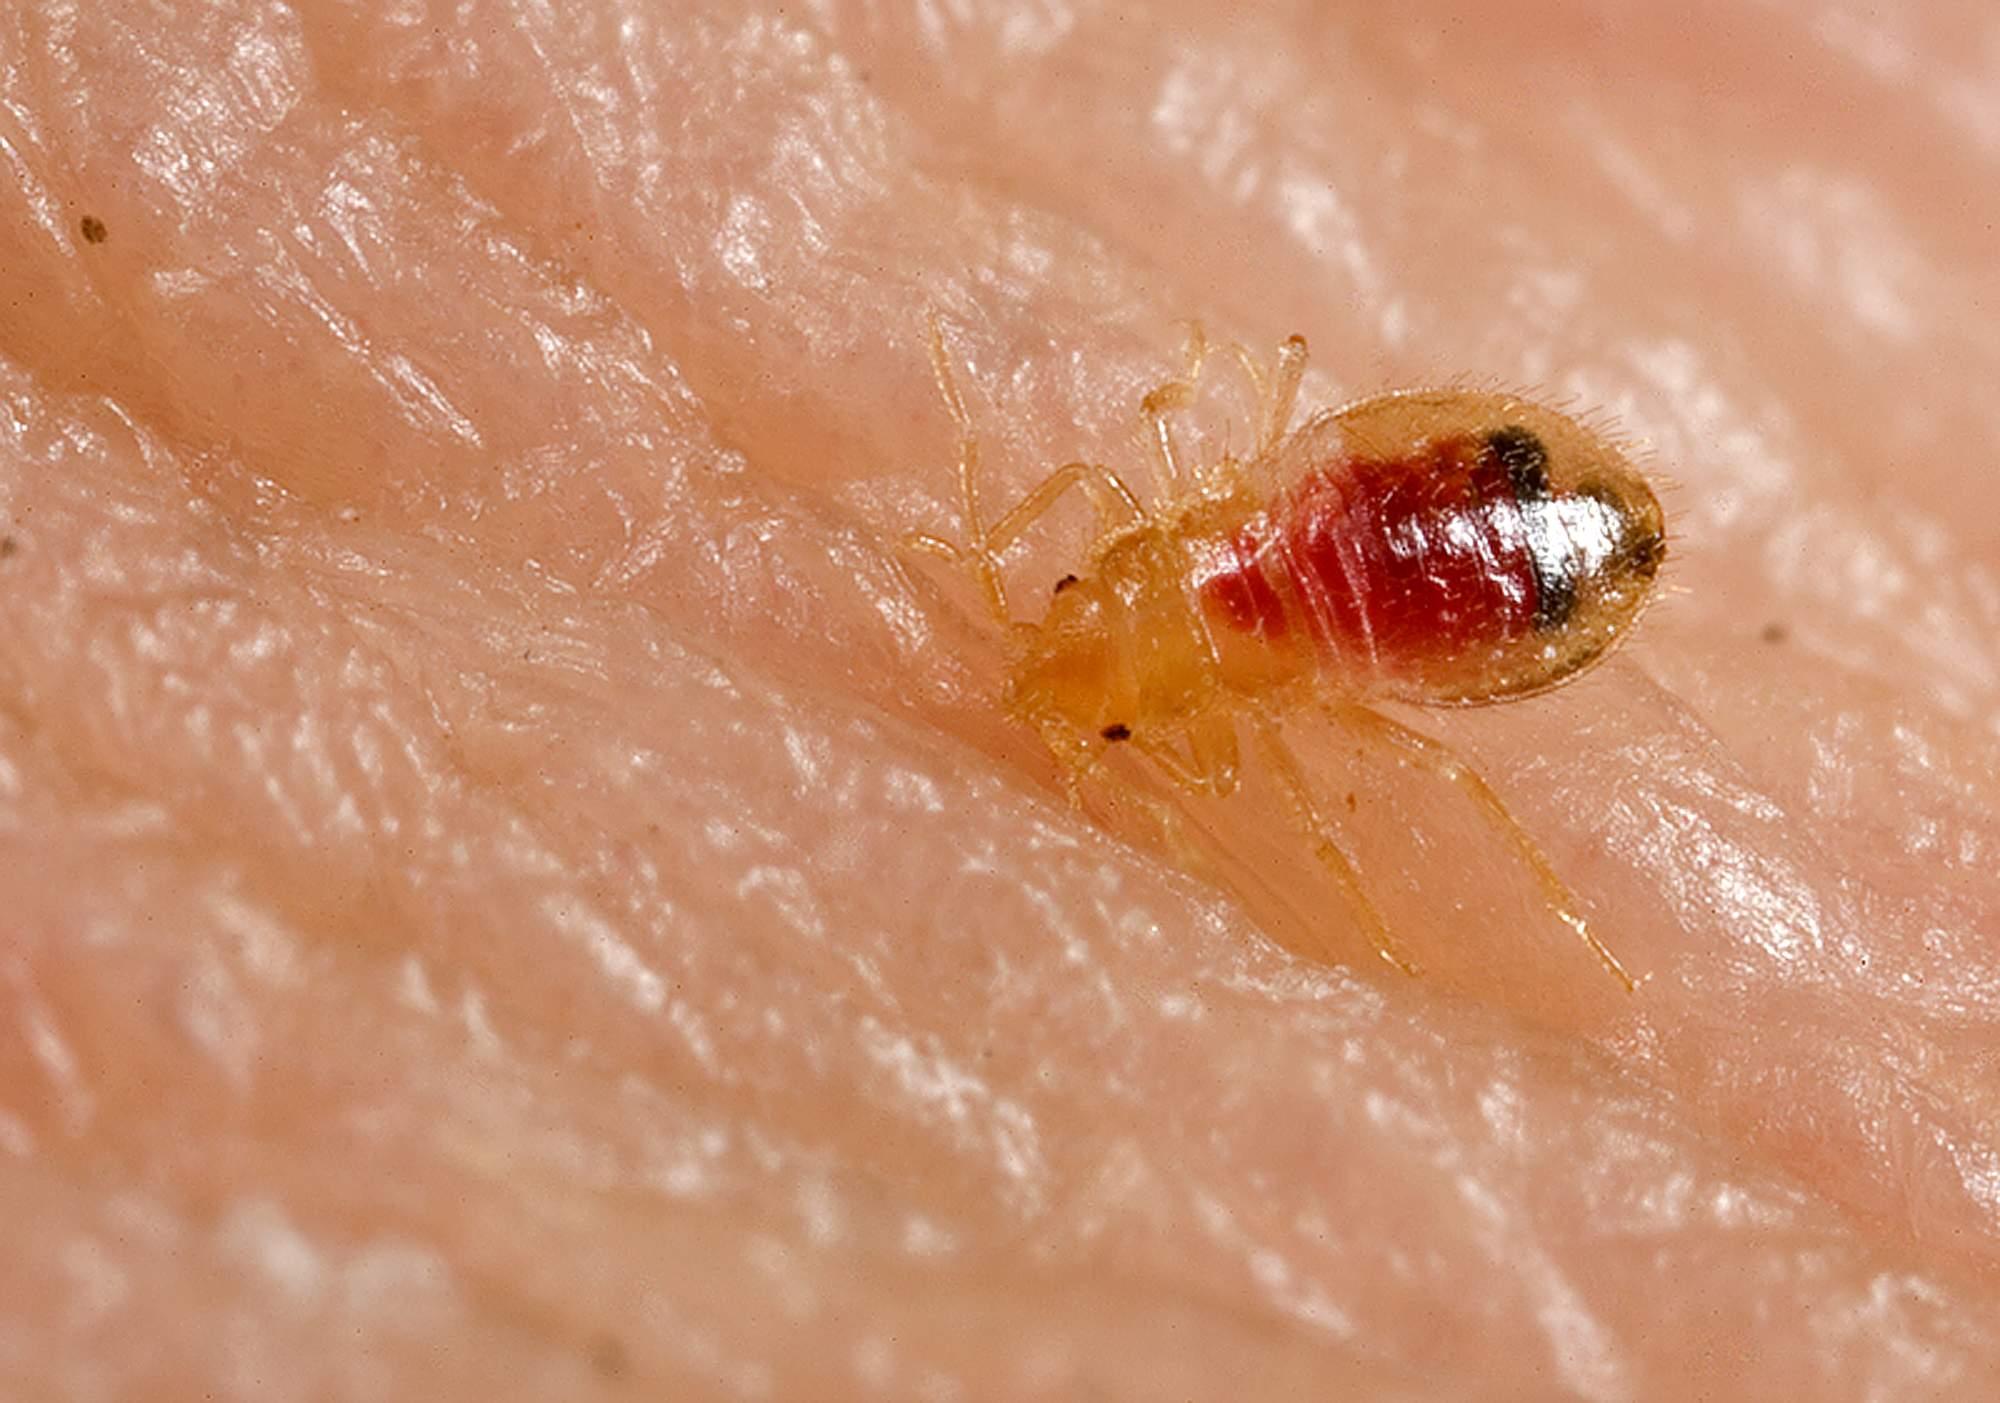 Pictures Of Adult Bed Bugs.